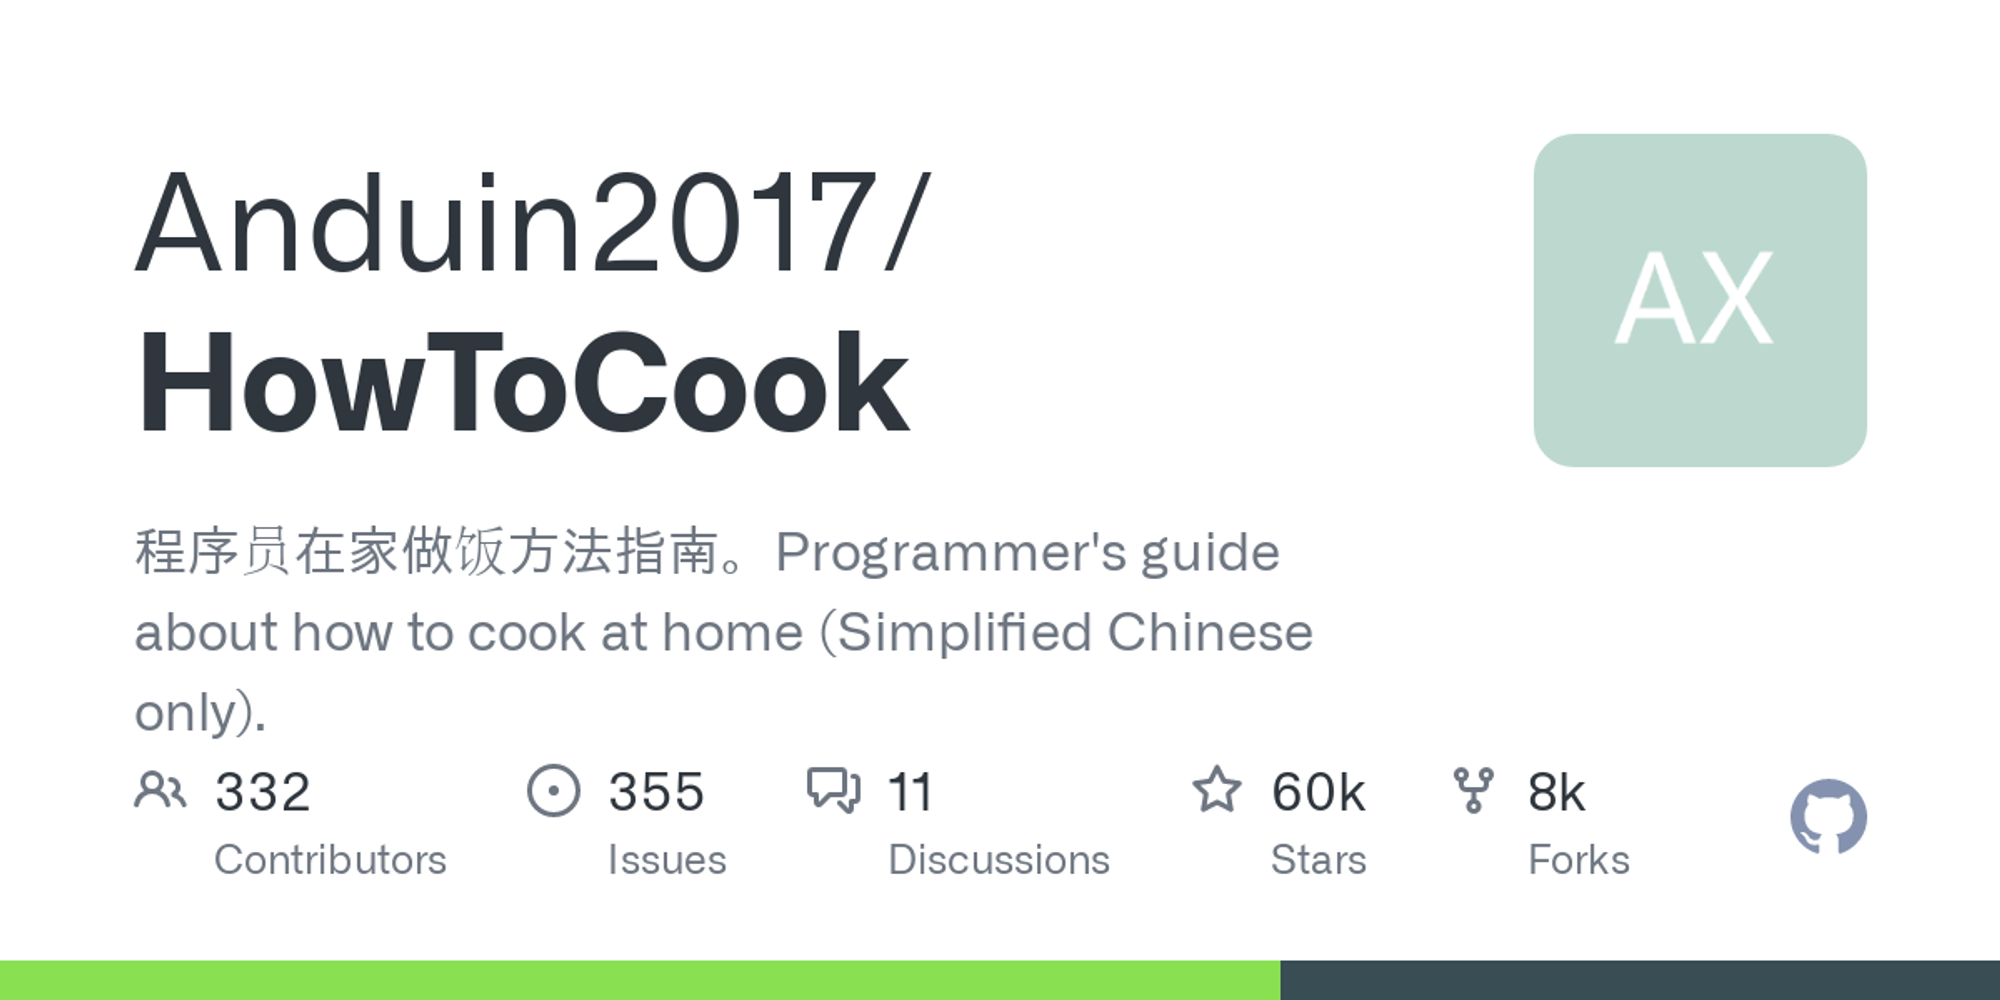 GitHub - Anduin2017/HowToCook: 程序员在家做饭方法指南。Programmer's guide about how to cook at home (Chinese only).